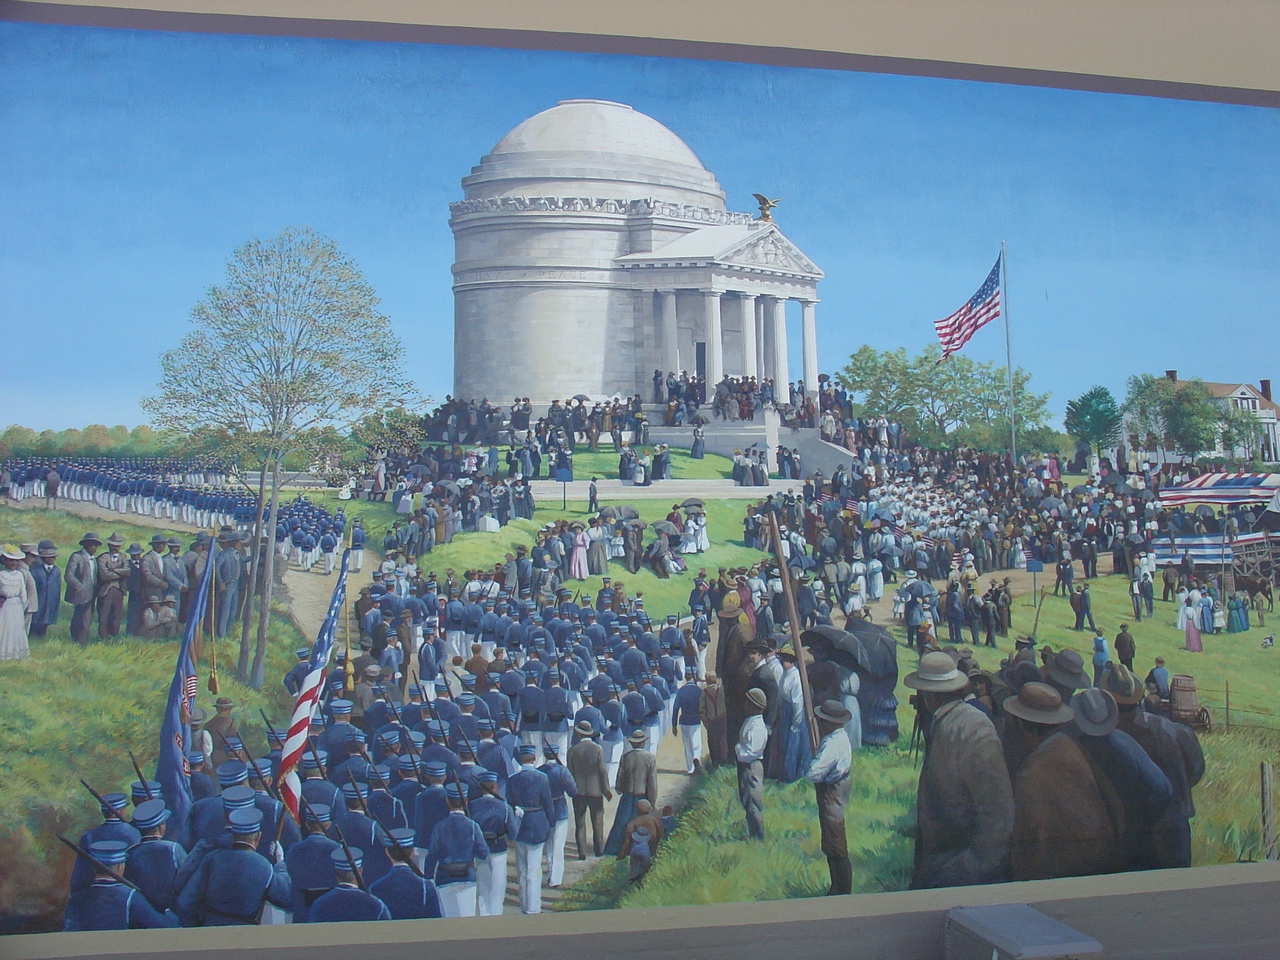 Dedication of the Illinois Memorial, October 26, 1906, depicted on the floodwall in Vicksburg.